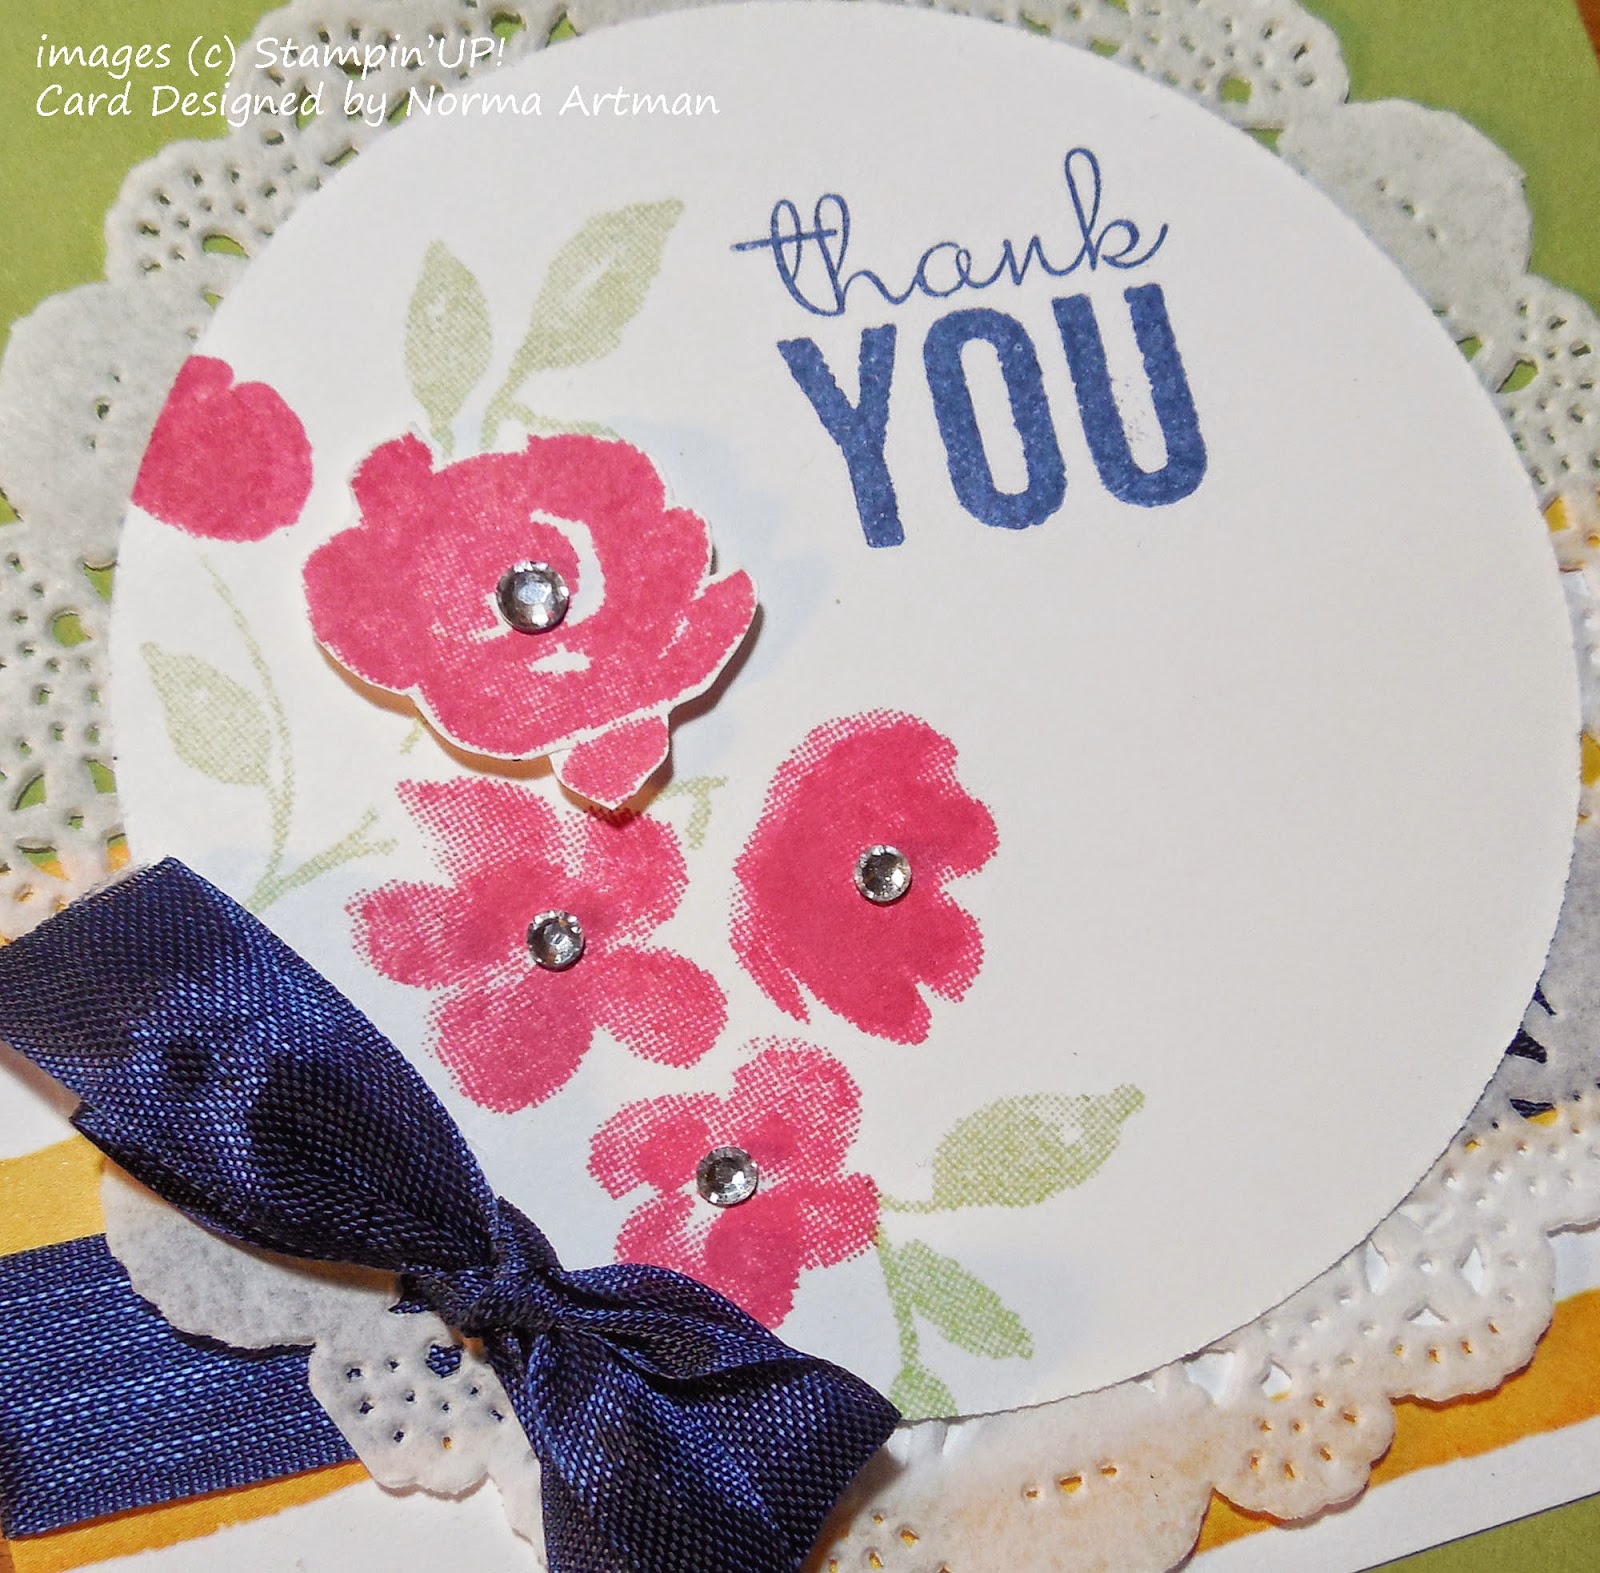 Card made with Stampin'UP!'s Painted Petals Stamp set